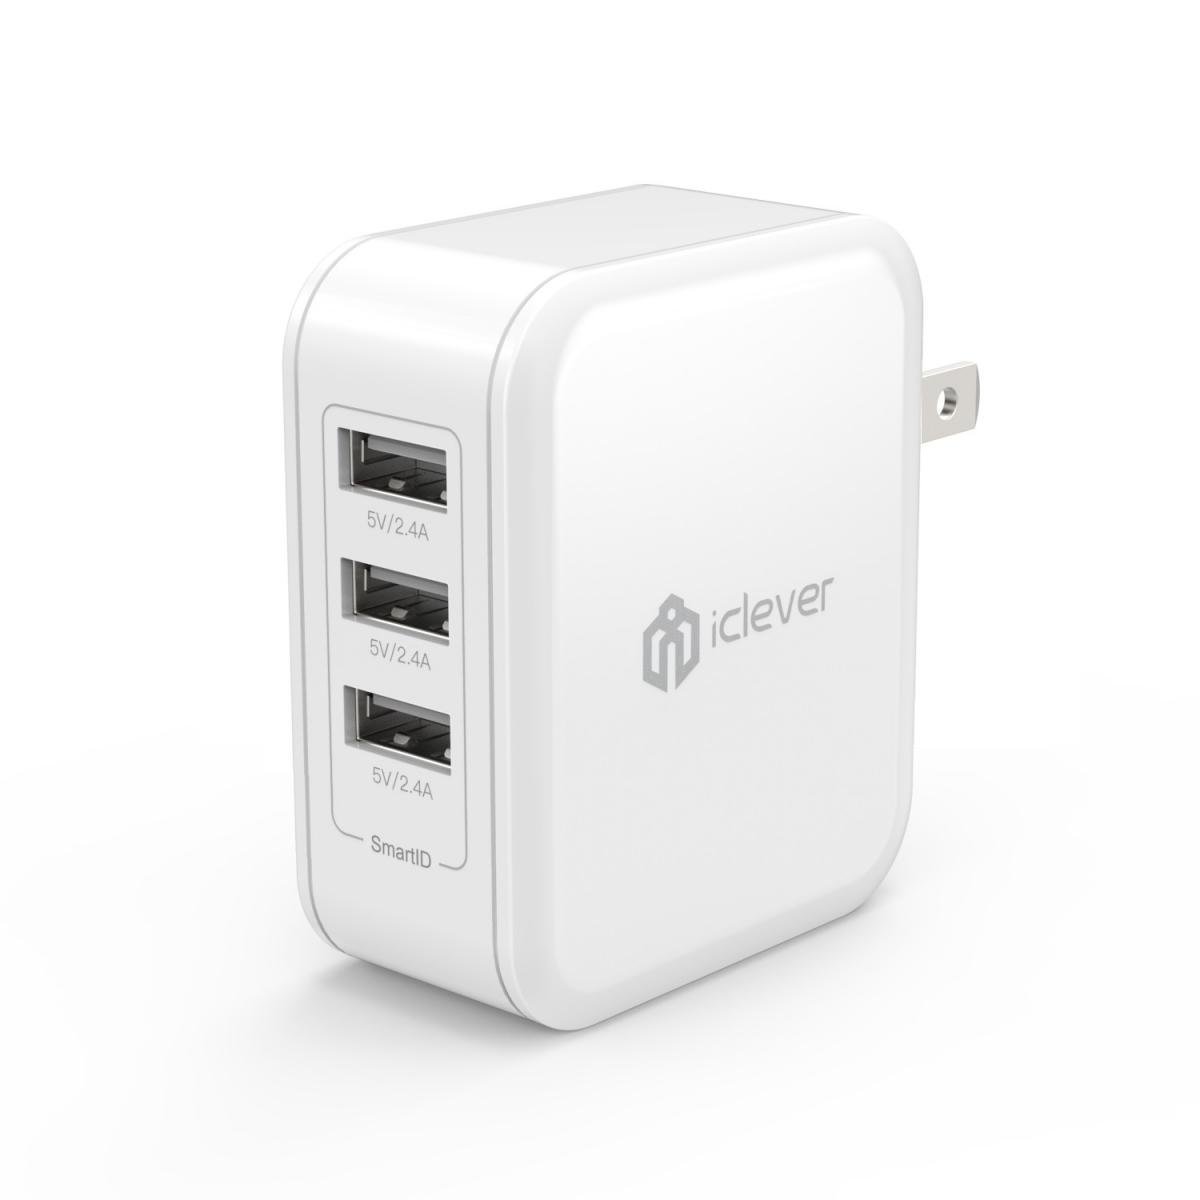 Lightning deal: iClever Boost Cube USB wall charger only $10 via Amazon